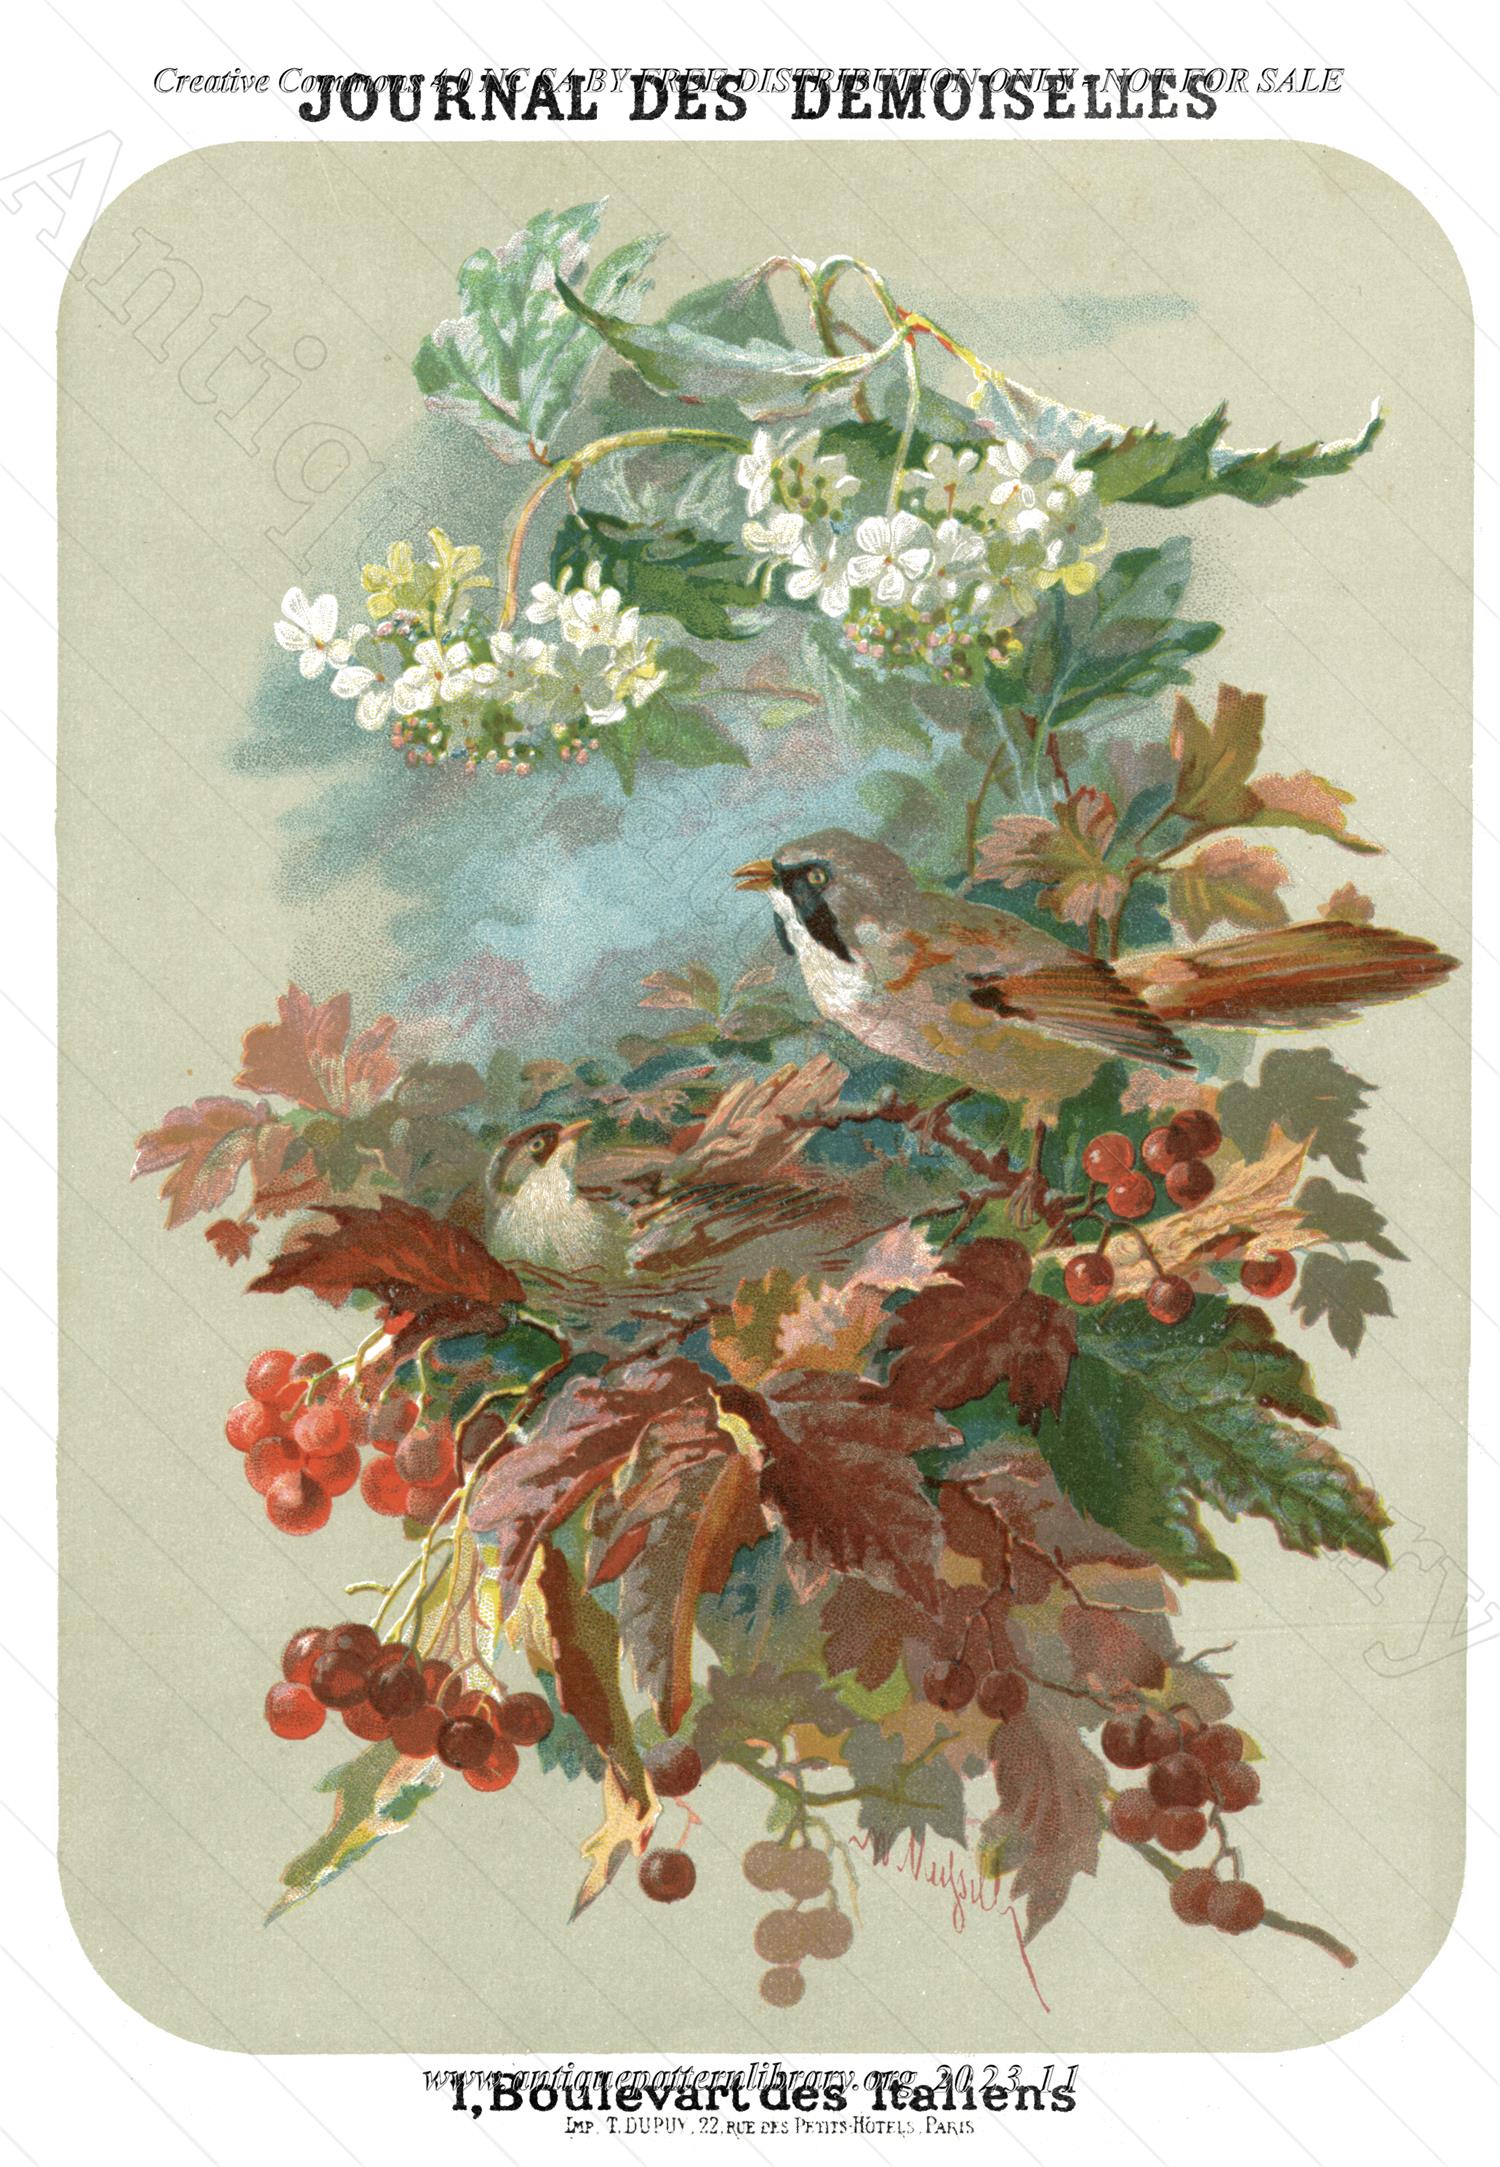 A-MH175 Illustration of birds, flowers, leaves and berries